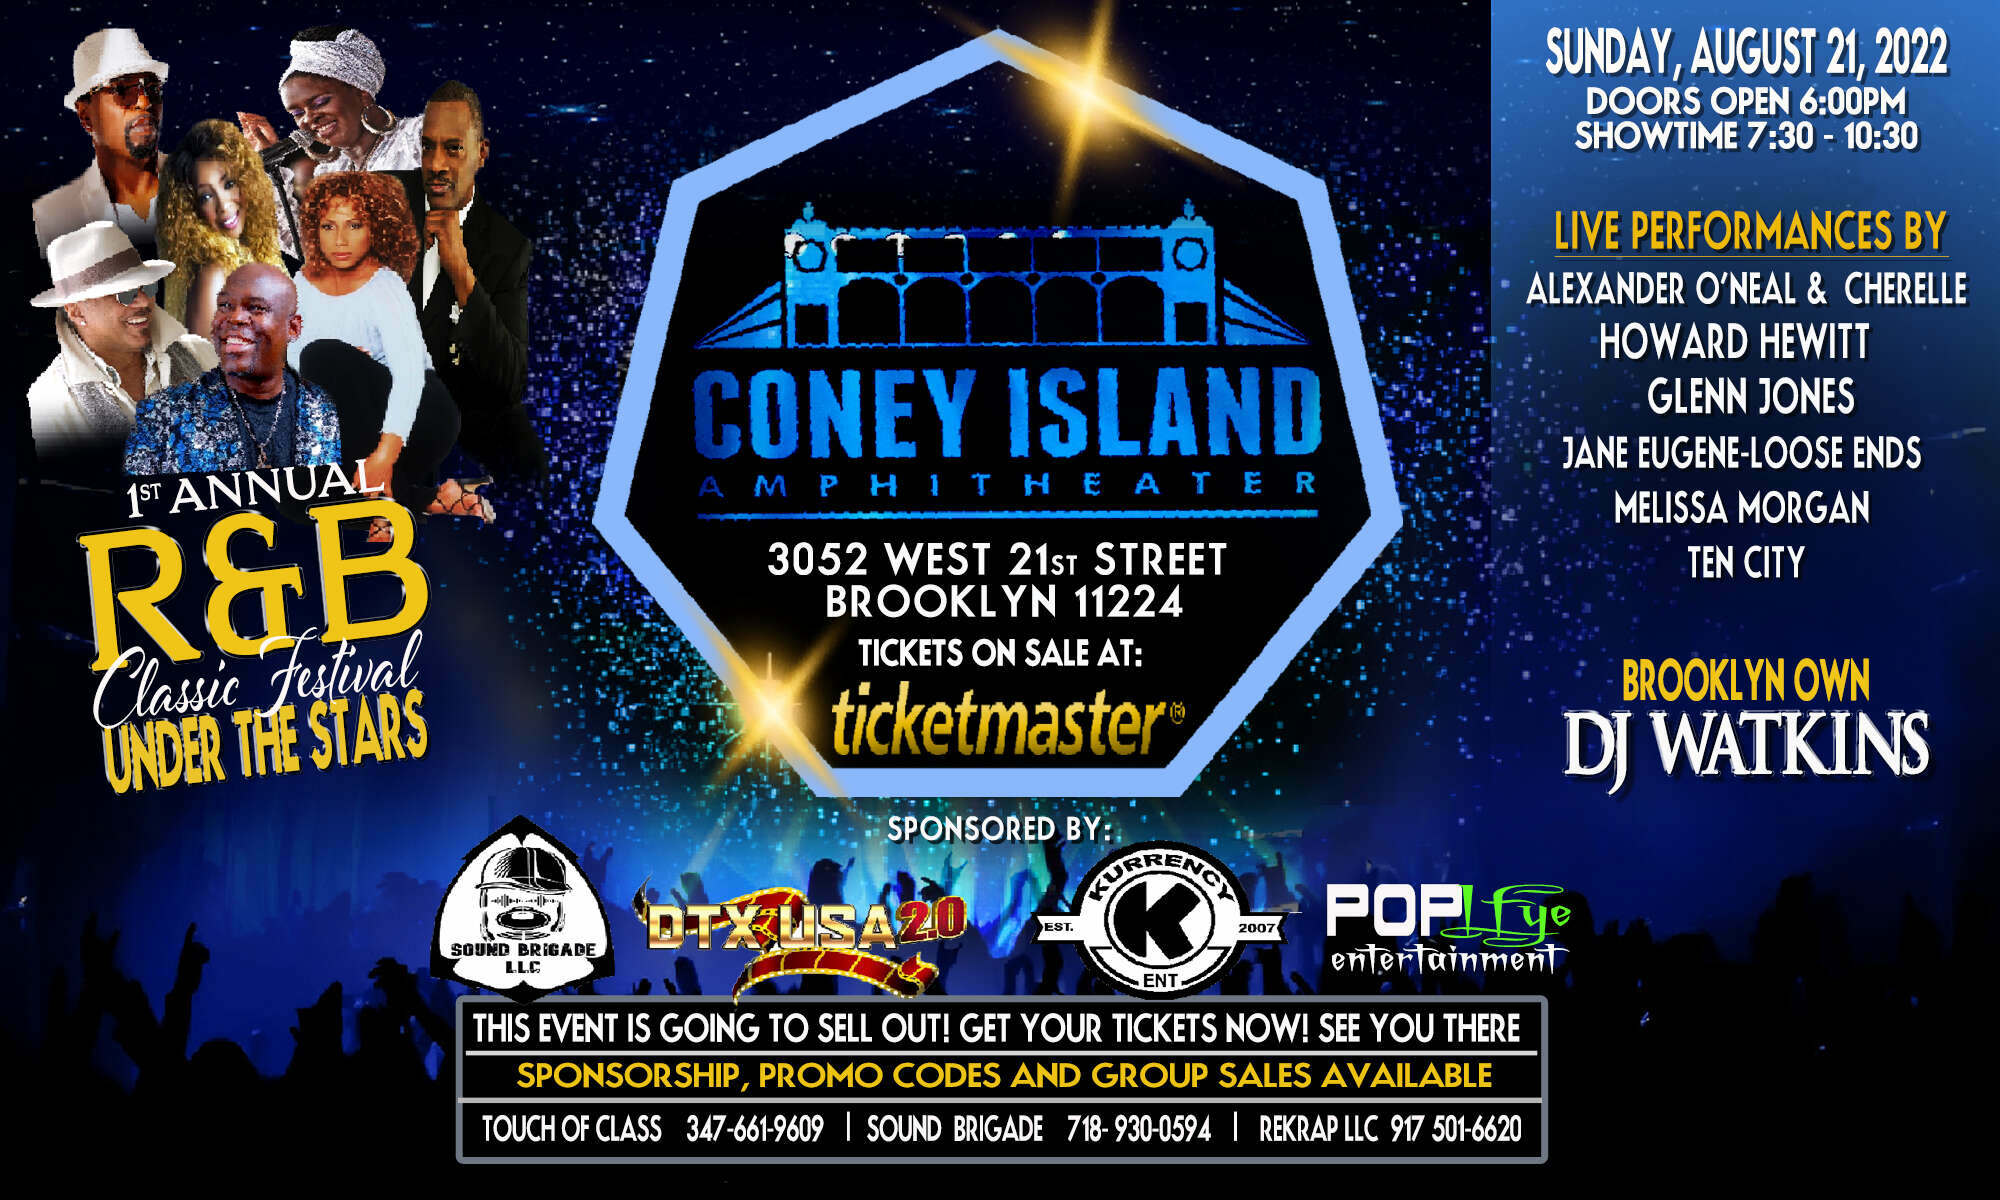 1st Annual Night of R&B Classics Under The Stars Live Concert